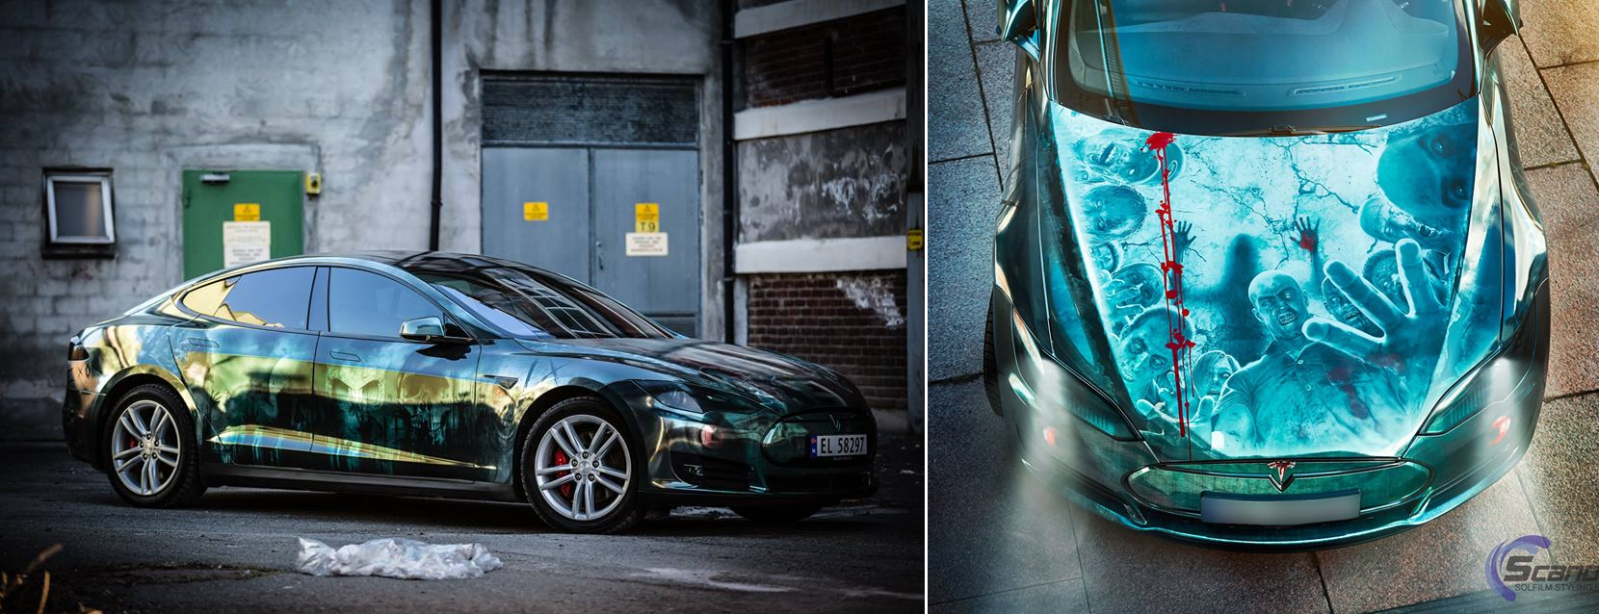 A Zombie Themed Tesla Model S To Blend In During The Apocalypse Gallery Electrek